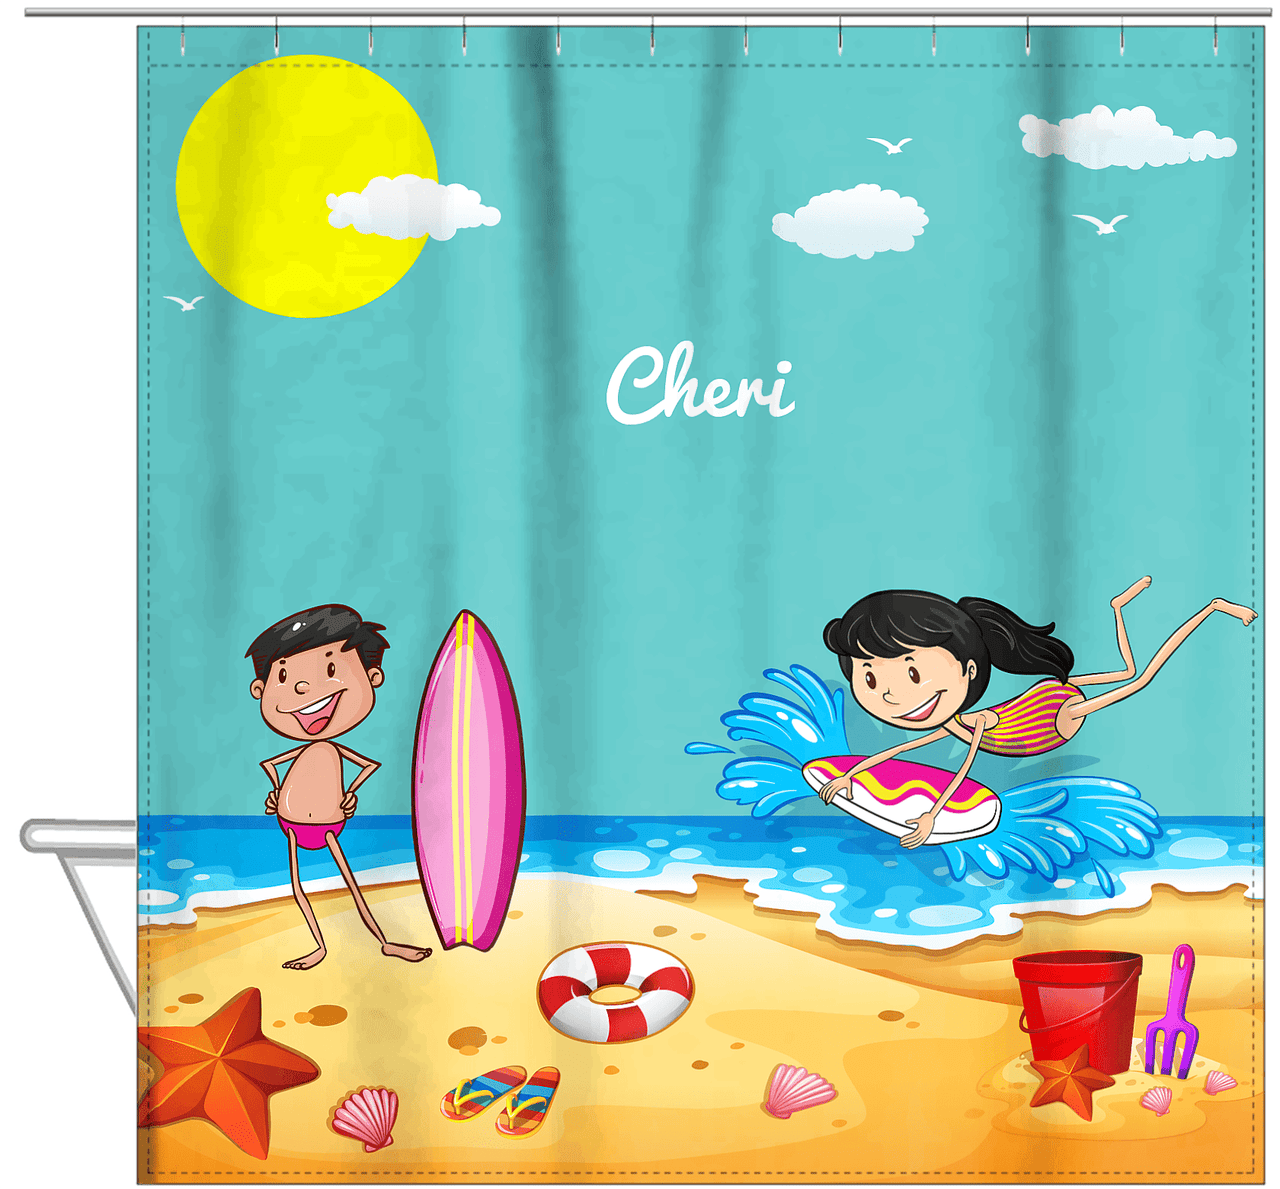 Personalized Beach Shower Curtain X - Body Boarding - Black Hair Girl - Hanging View